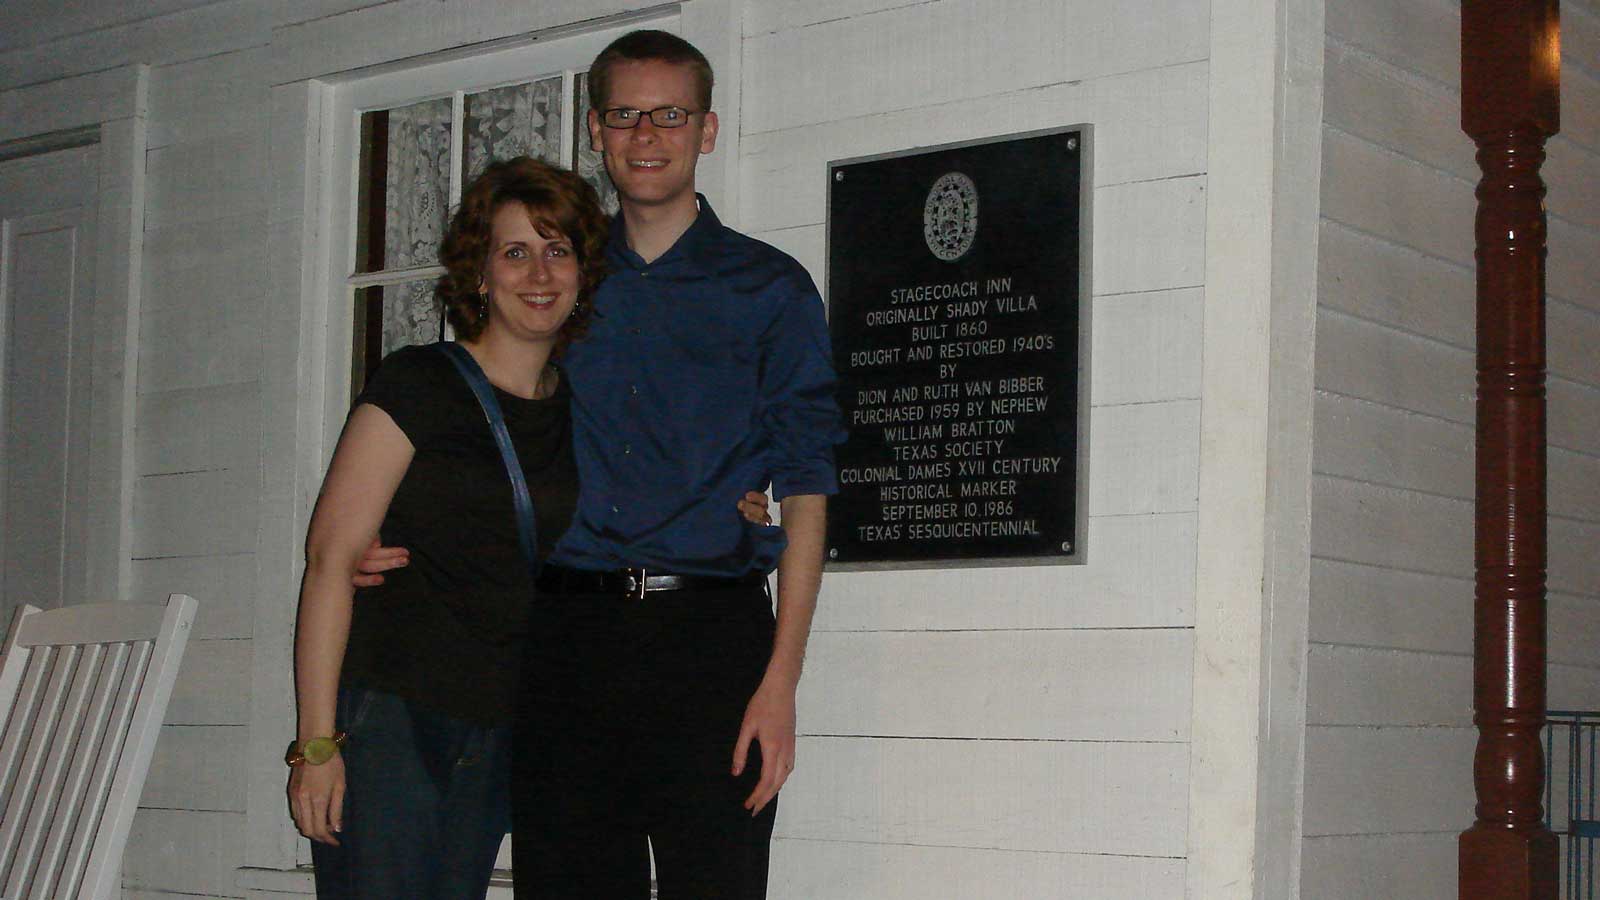 William and Rebecca outside Stagecoach Inn